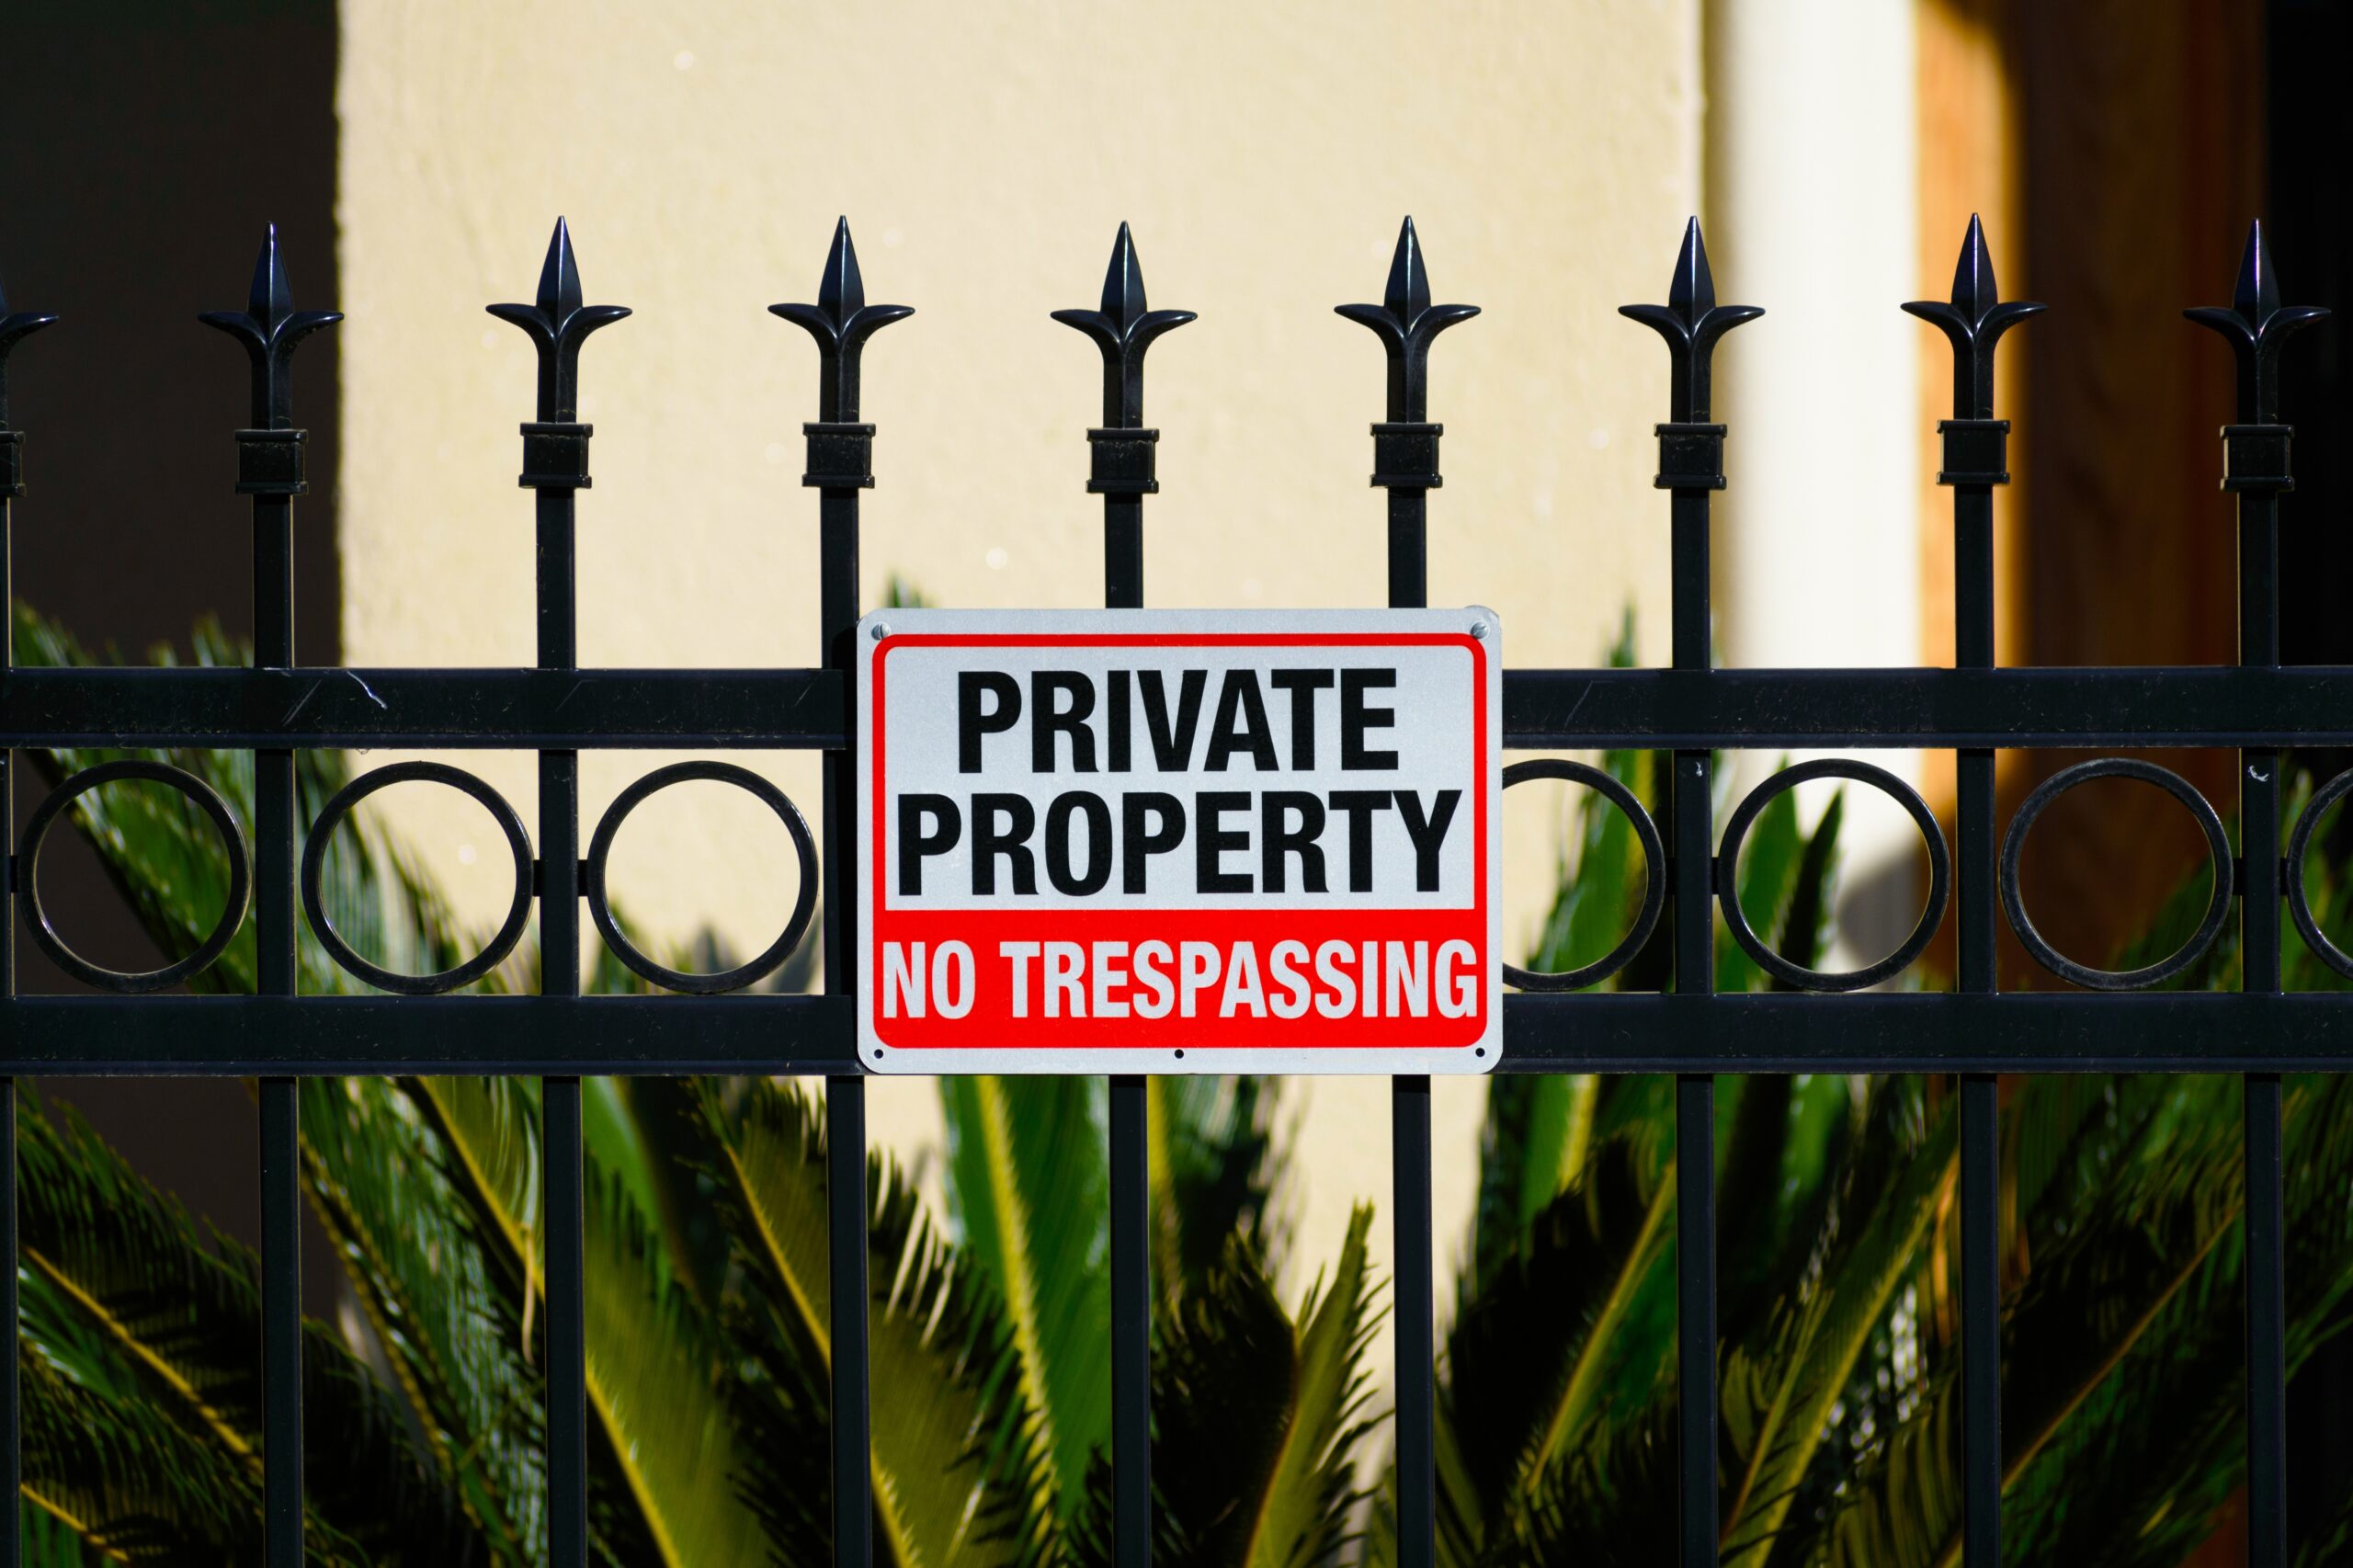 Employing security services to protect vacant property